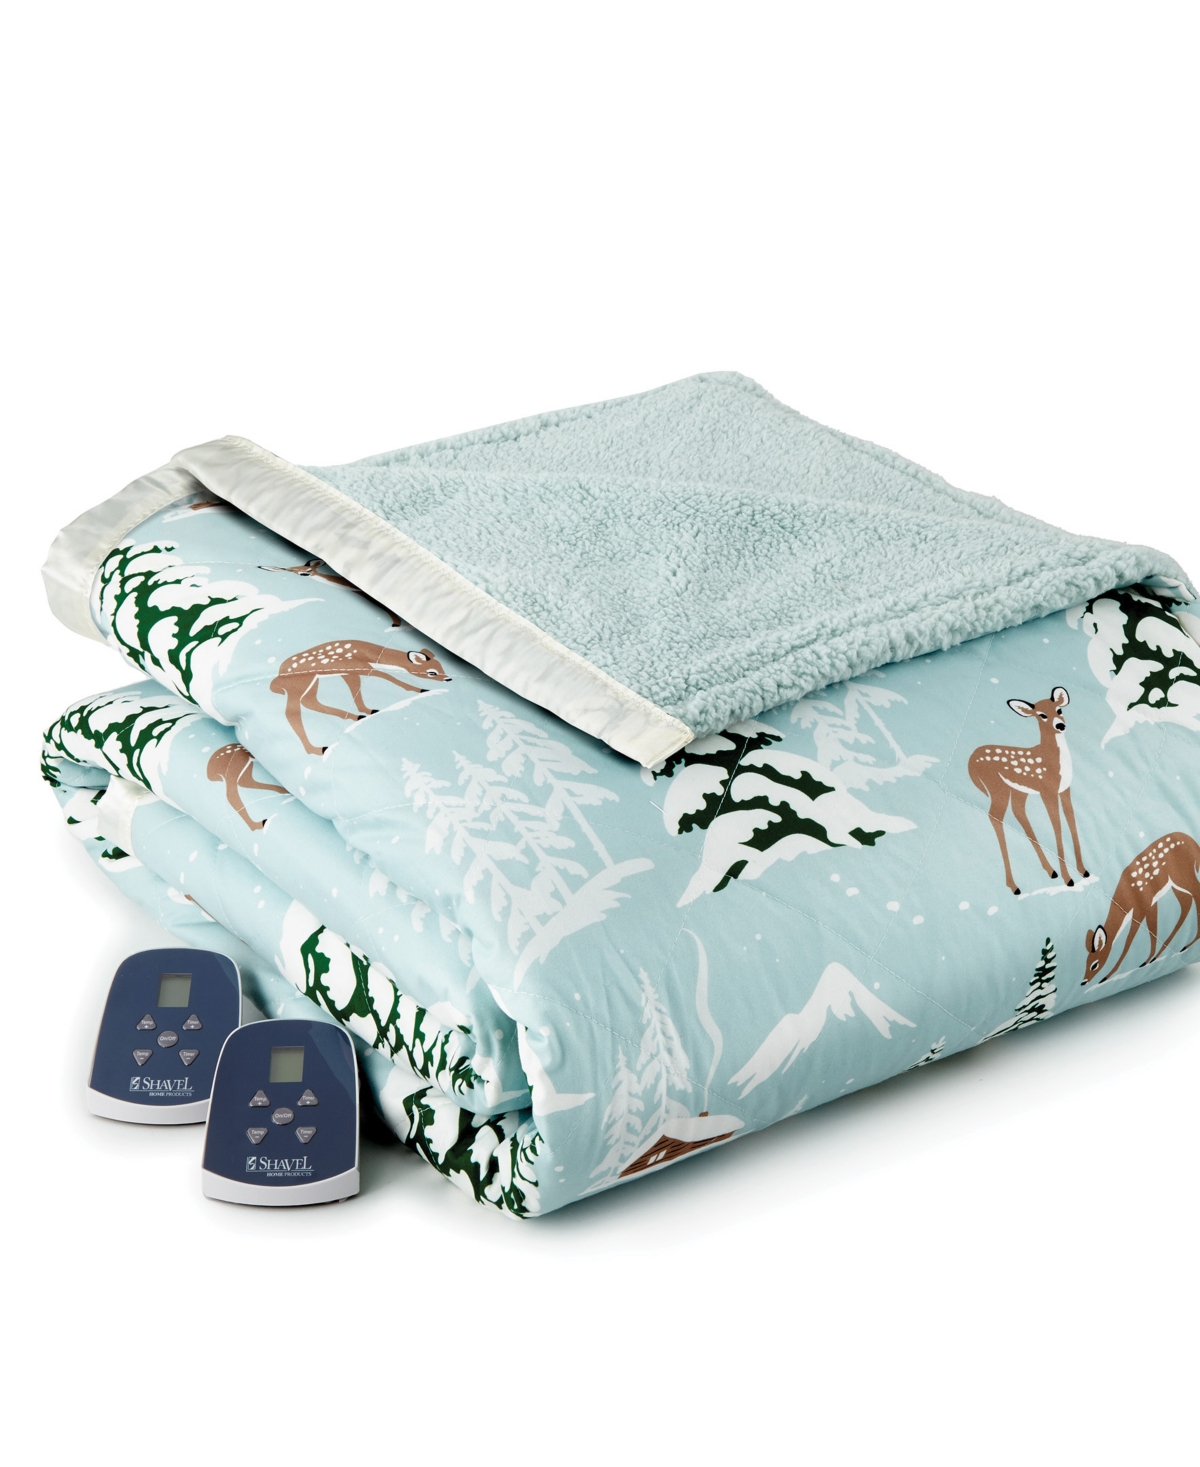 Shavel Reversible Micro Flannel To Sherpa Queen Electric Blanket In Winter Wonderland